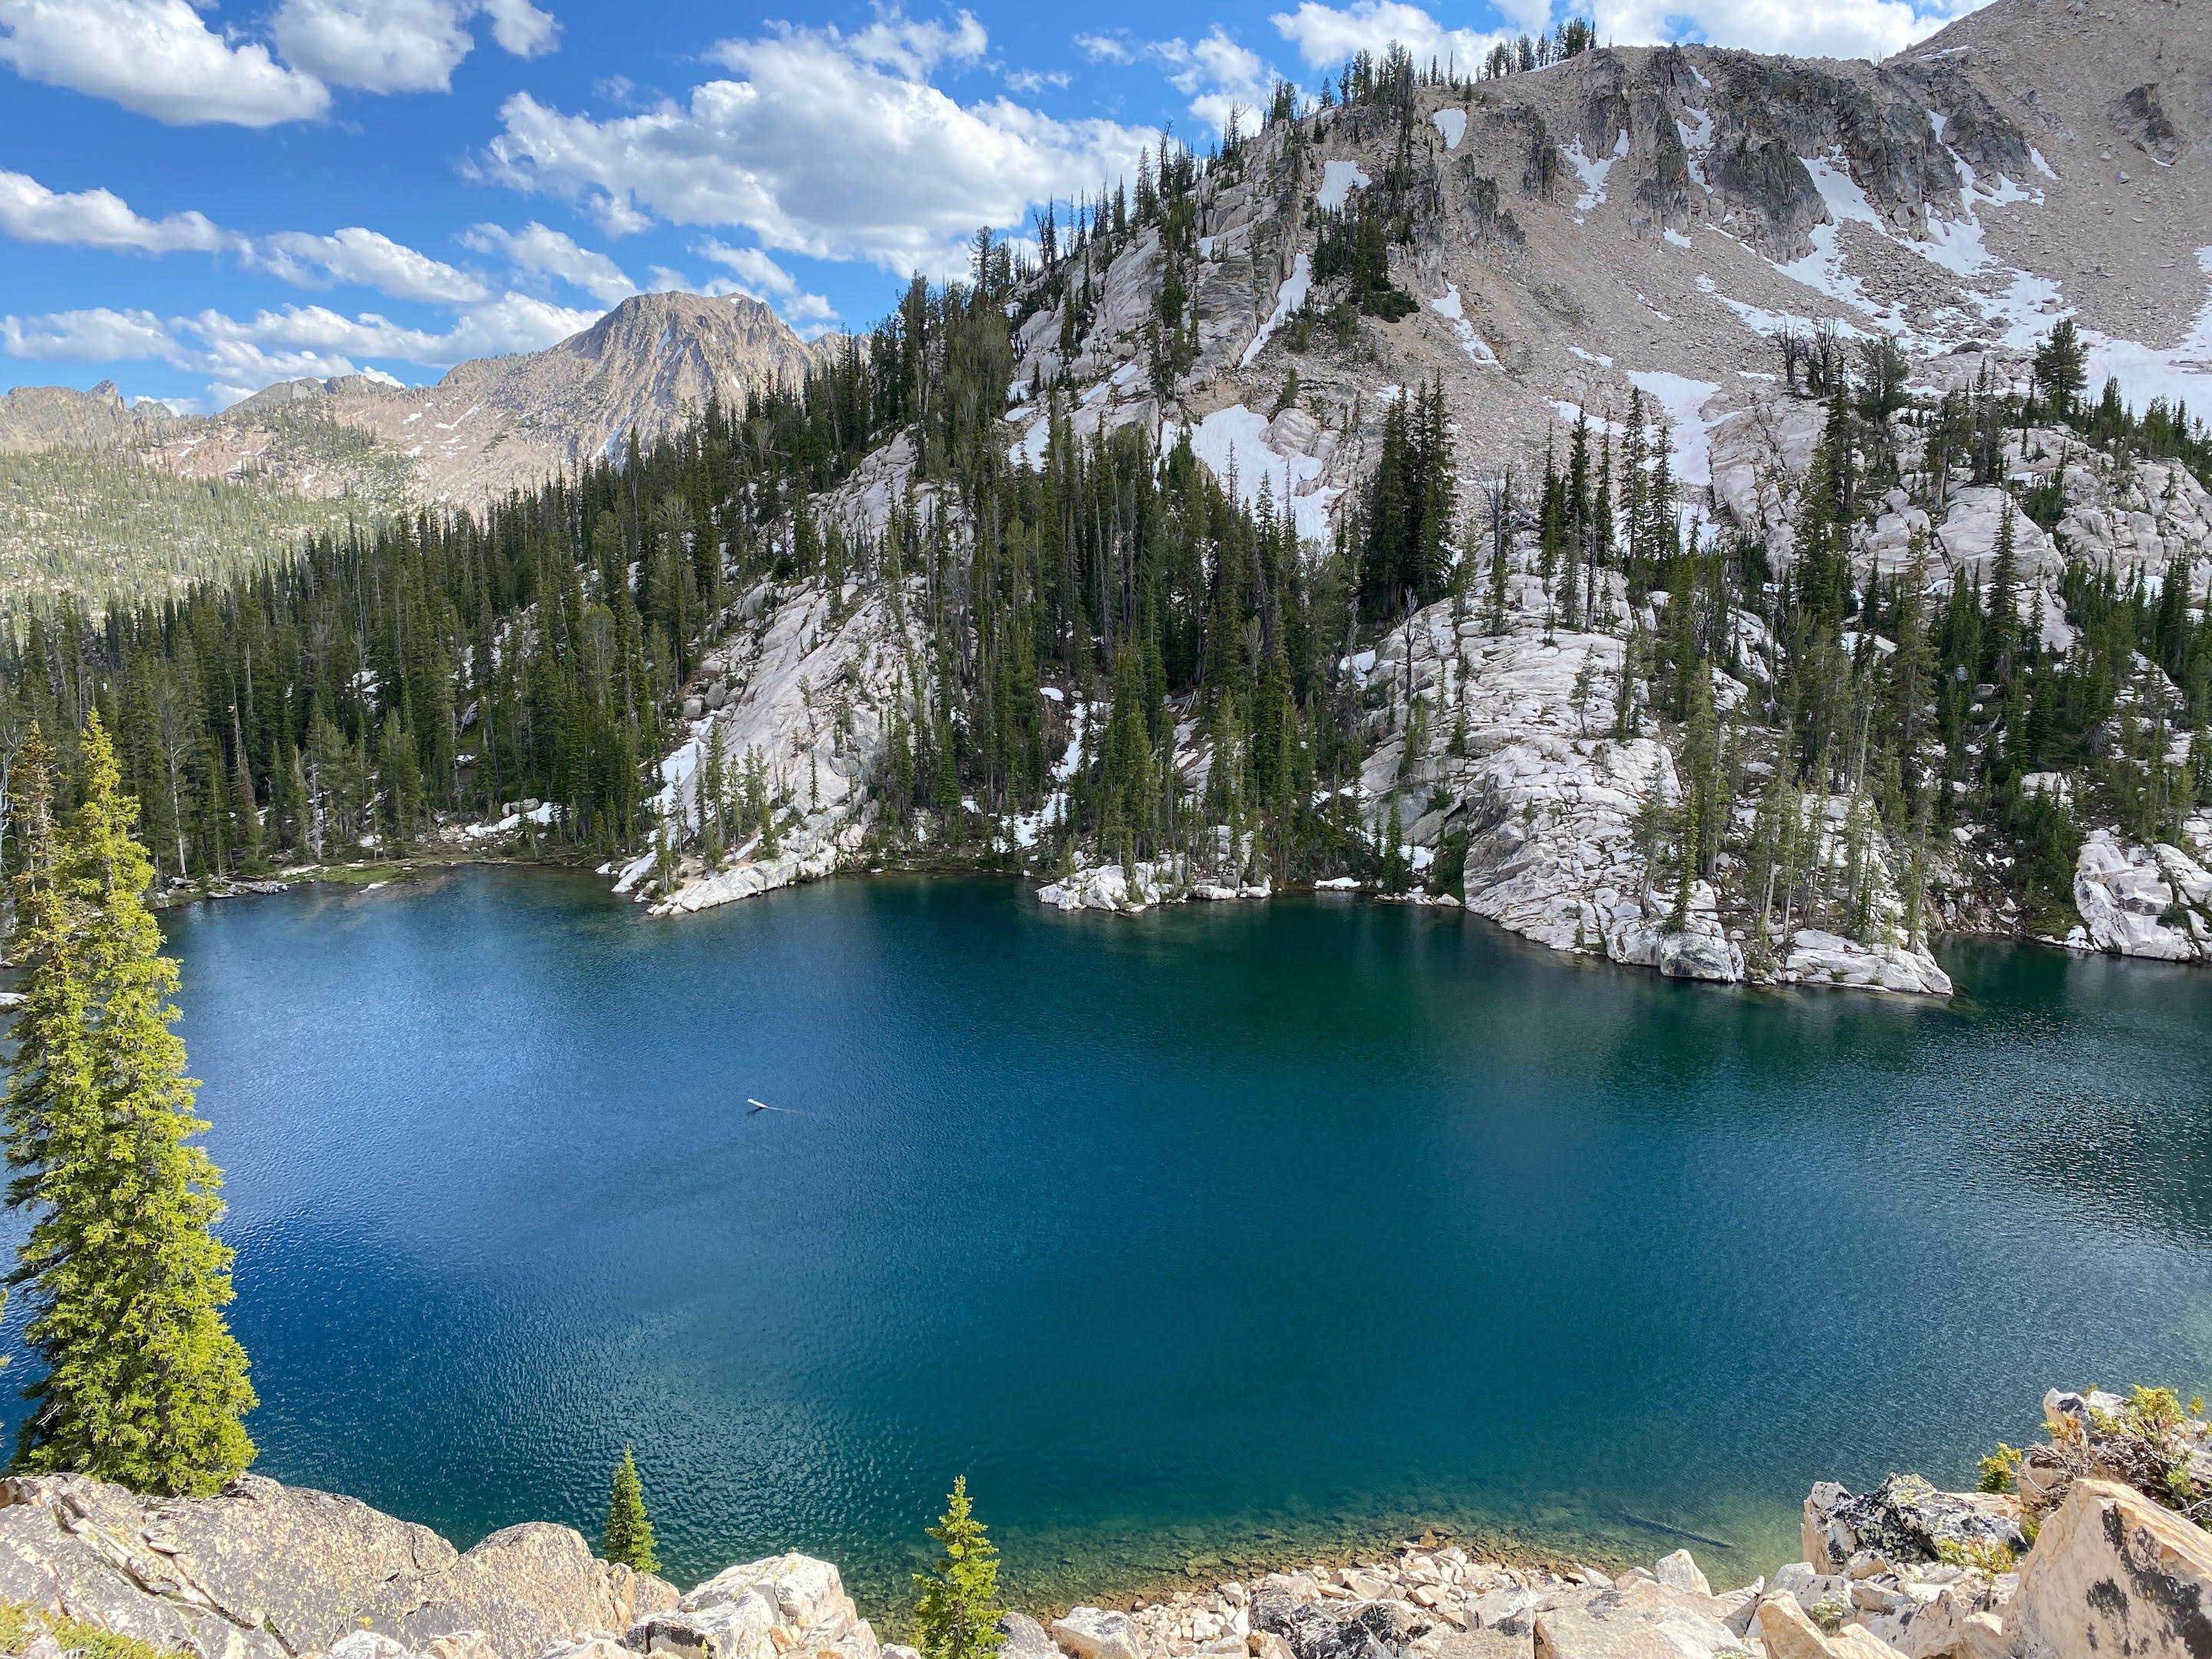 a beautiful mountain lake surrounded by spruce forest and high alpine scree and talus slopes